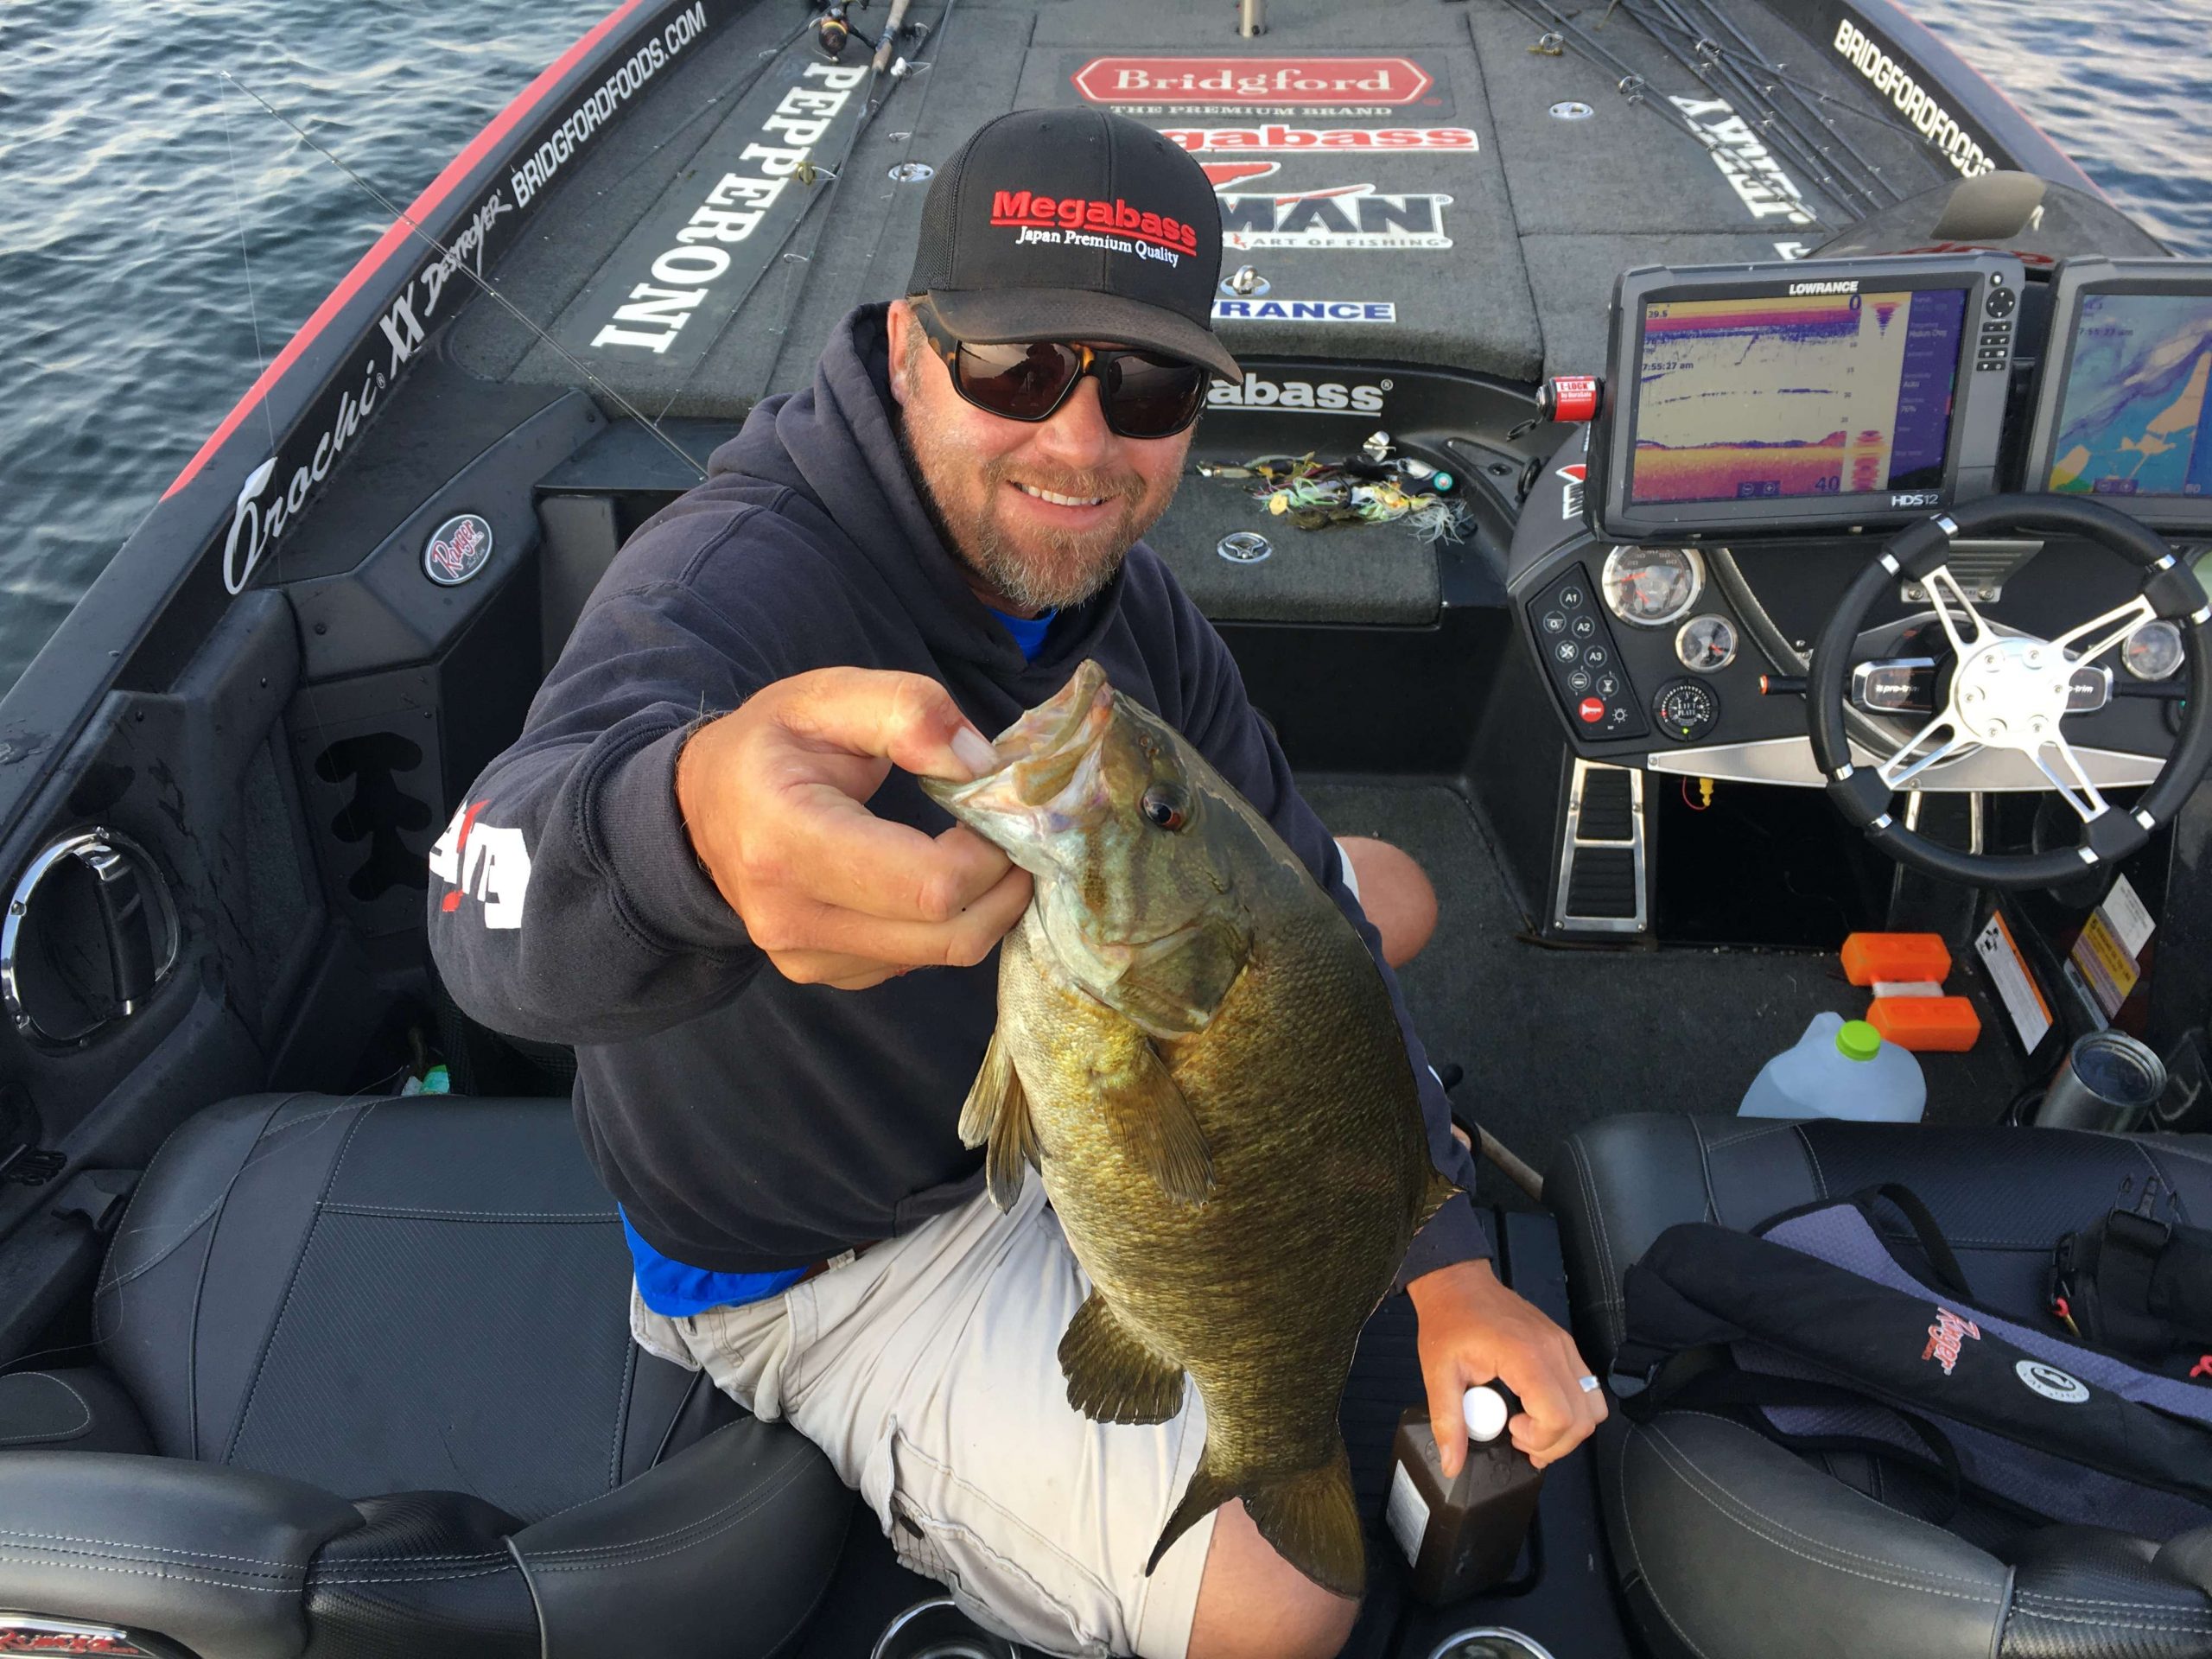 Luke Clausen, after bending the rod on two that didn't get in the boat, just landed a fat chunk that looks to be about 2 3/4-pounder.  Hopefully there are so more cooperators ready for a boat ride.